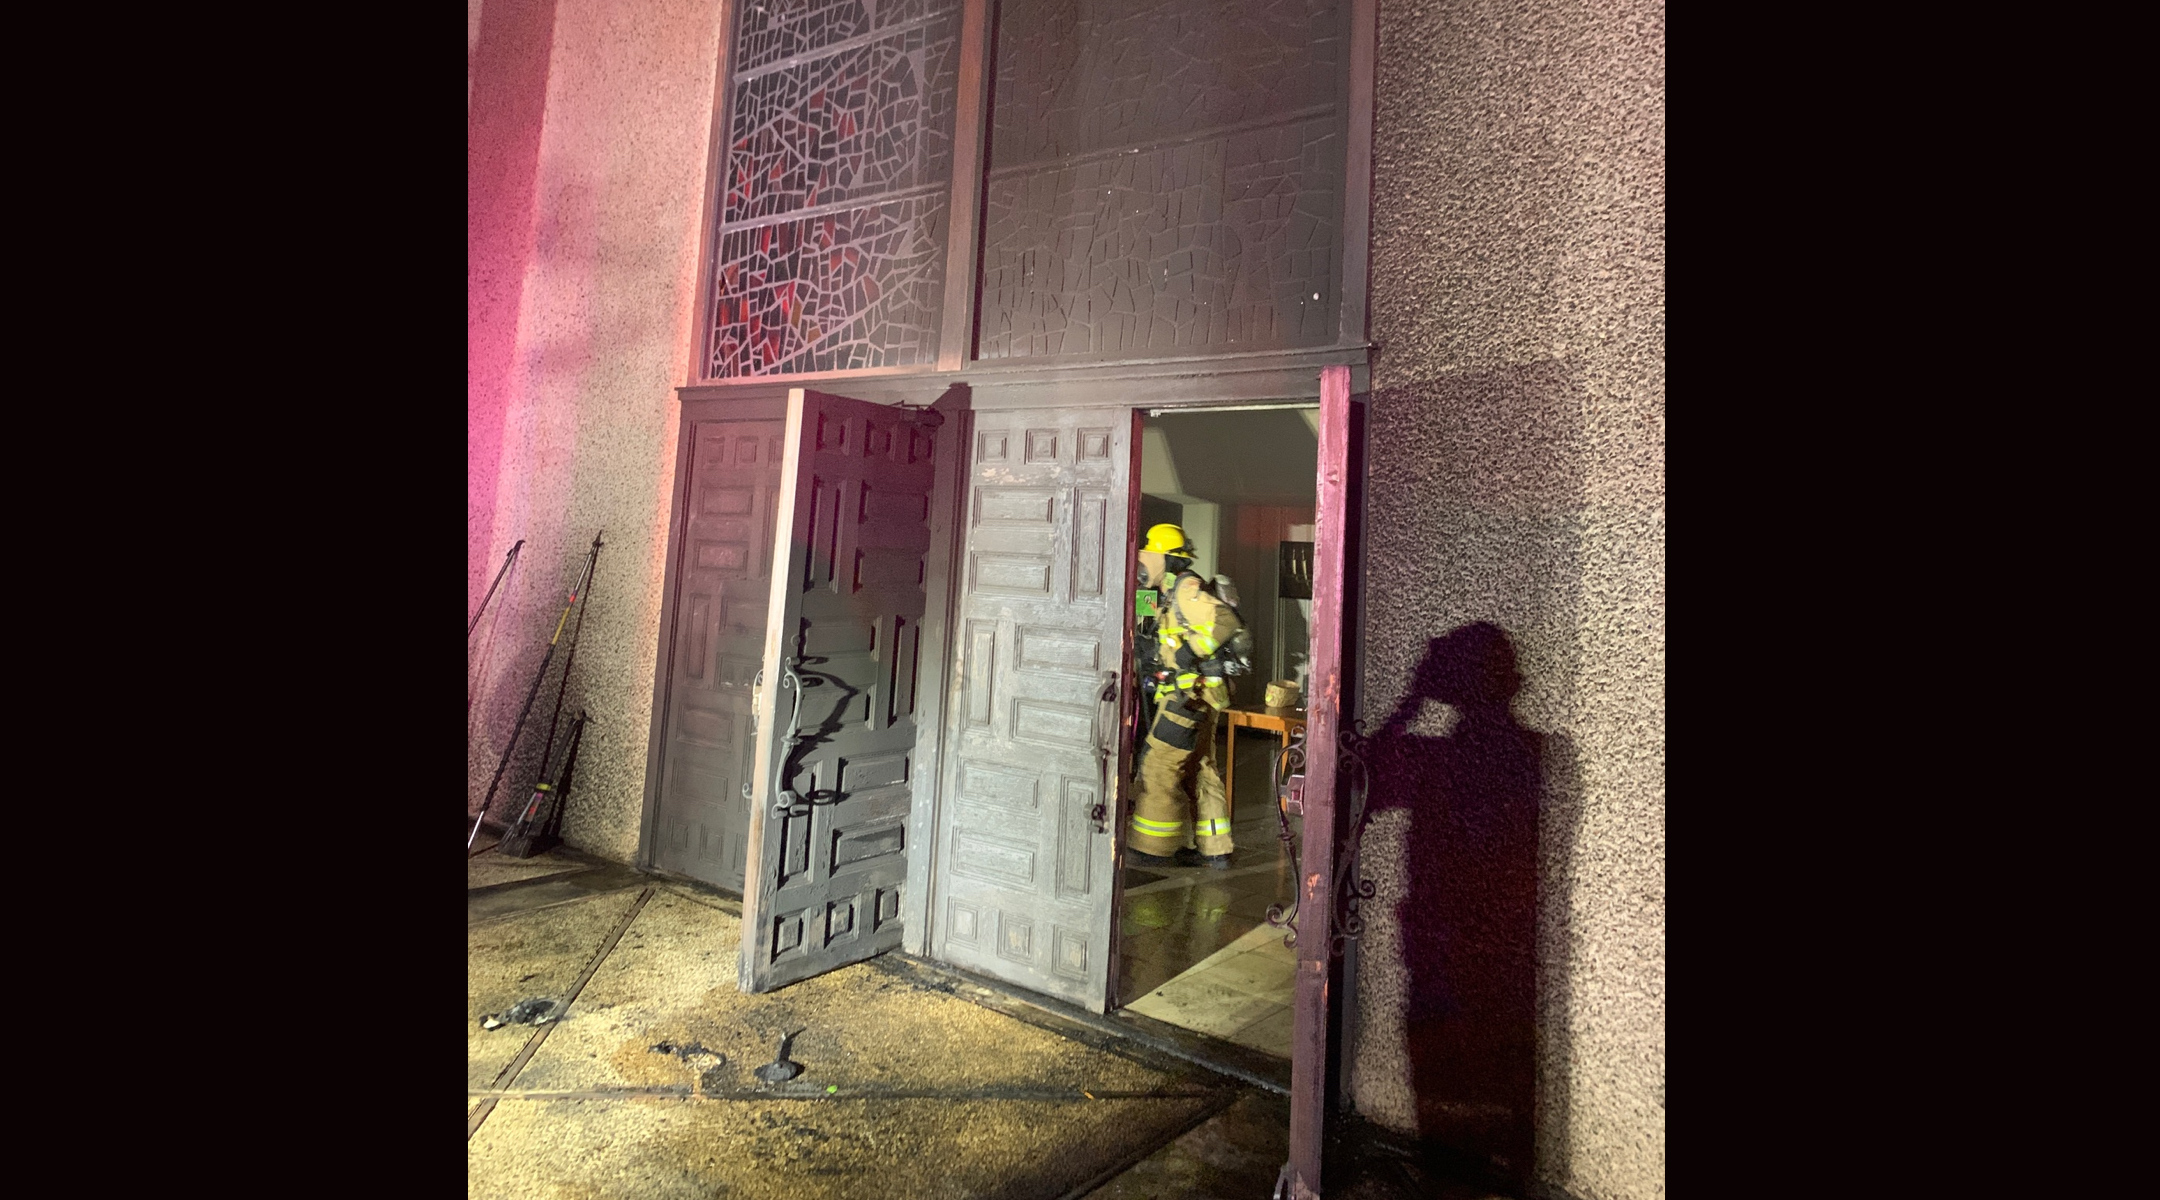 A fire at Congregation Beth Israel in Austin, Texas set on Sunday, Oct. 31, 2021 damaged the sanctuary, historic front doors and stained glass windows at the Reform synagogue. (Austin Fire Department)